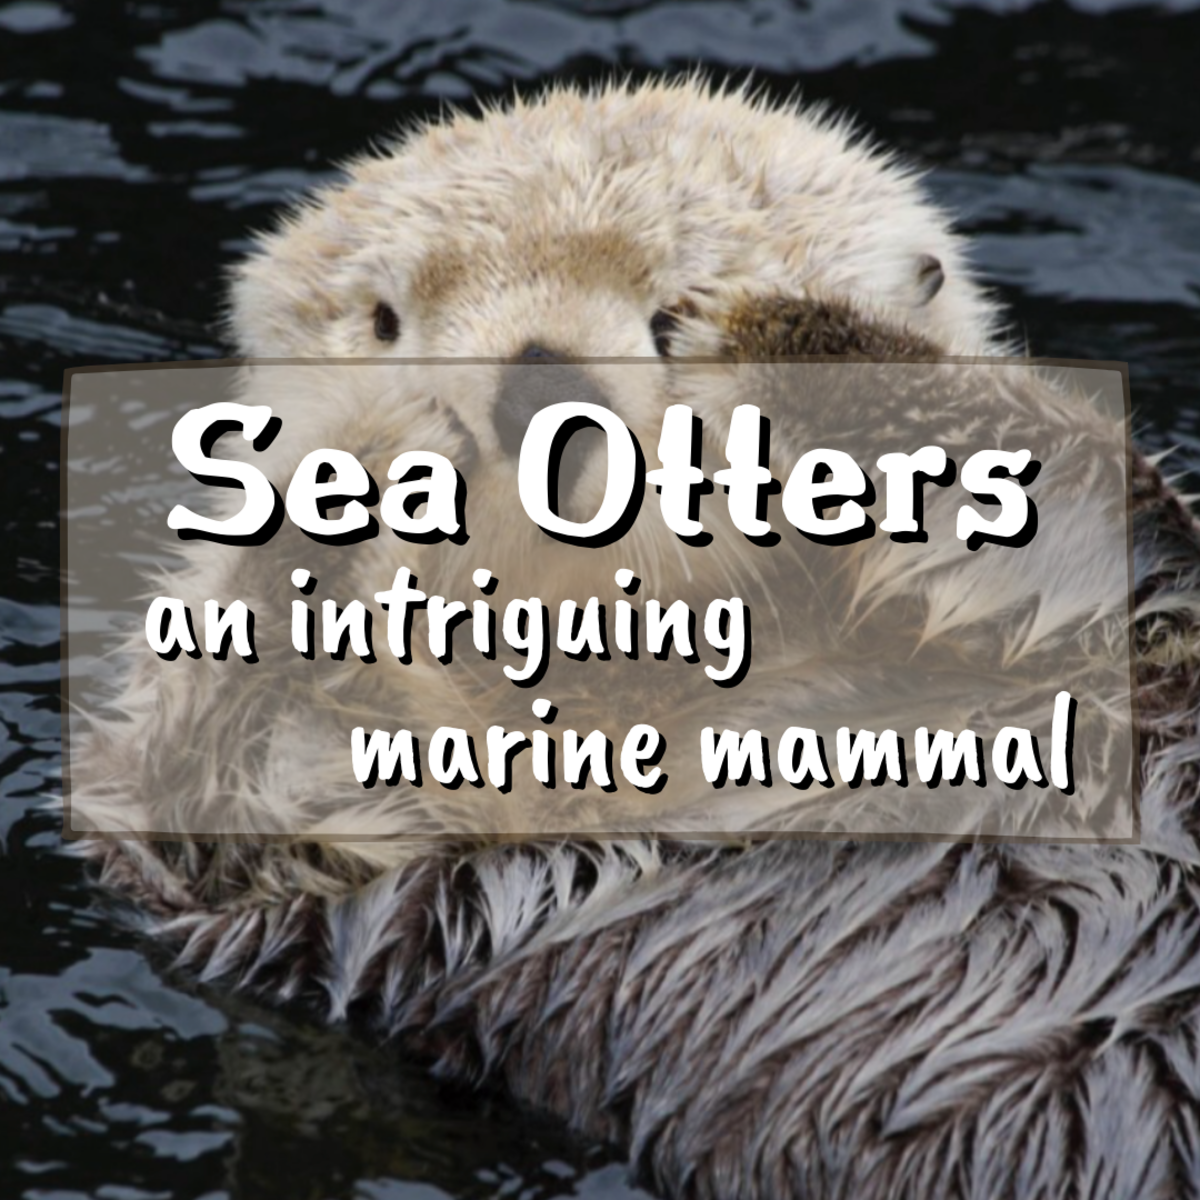 Sea Otter: Facts and Info